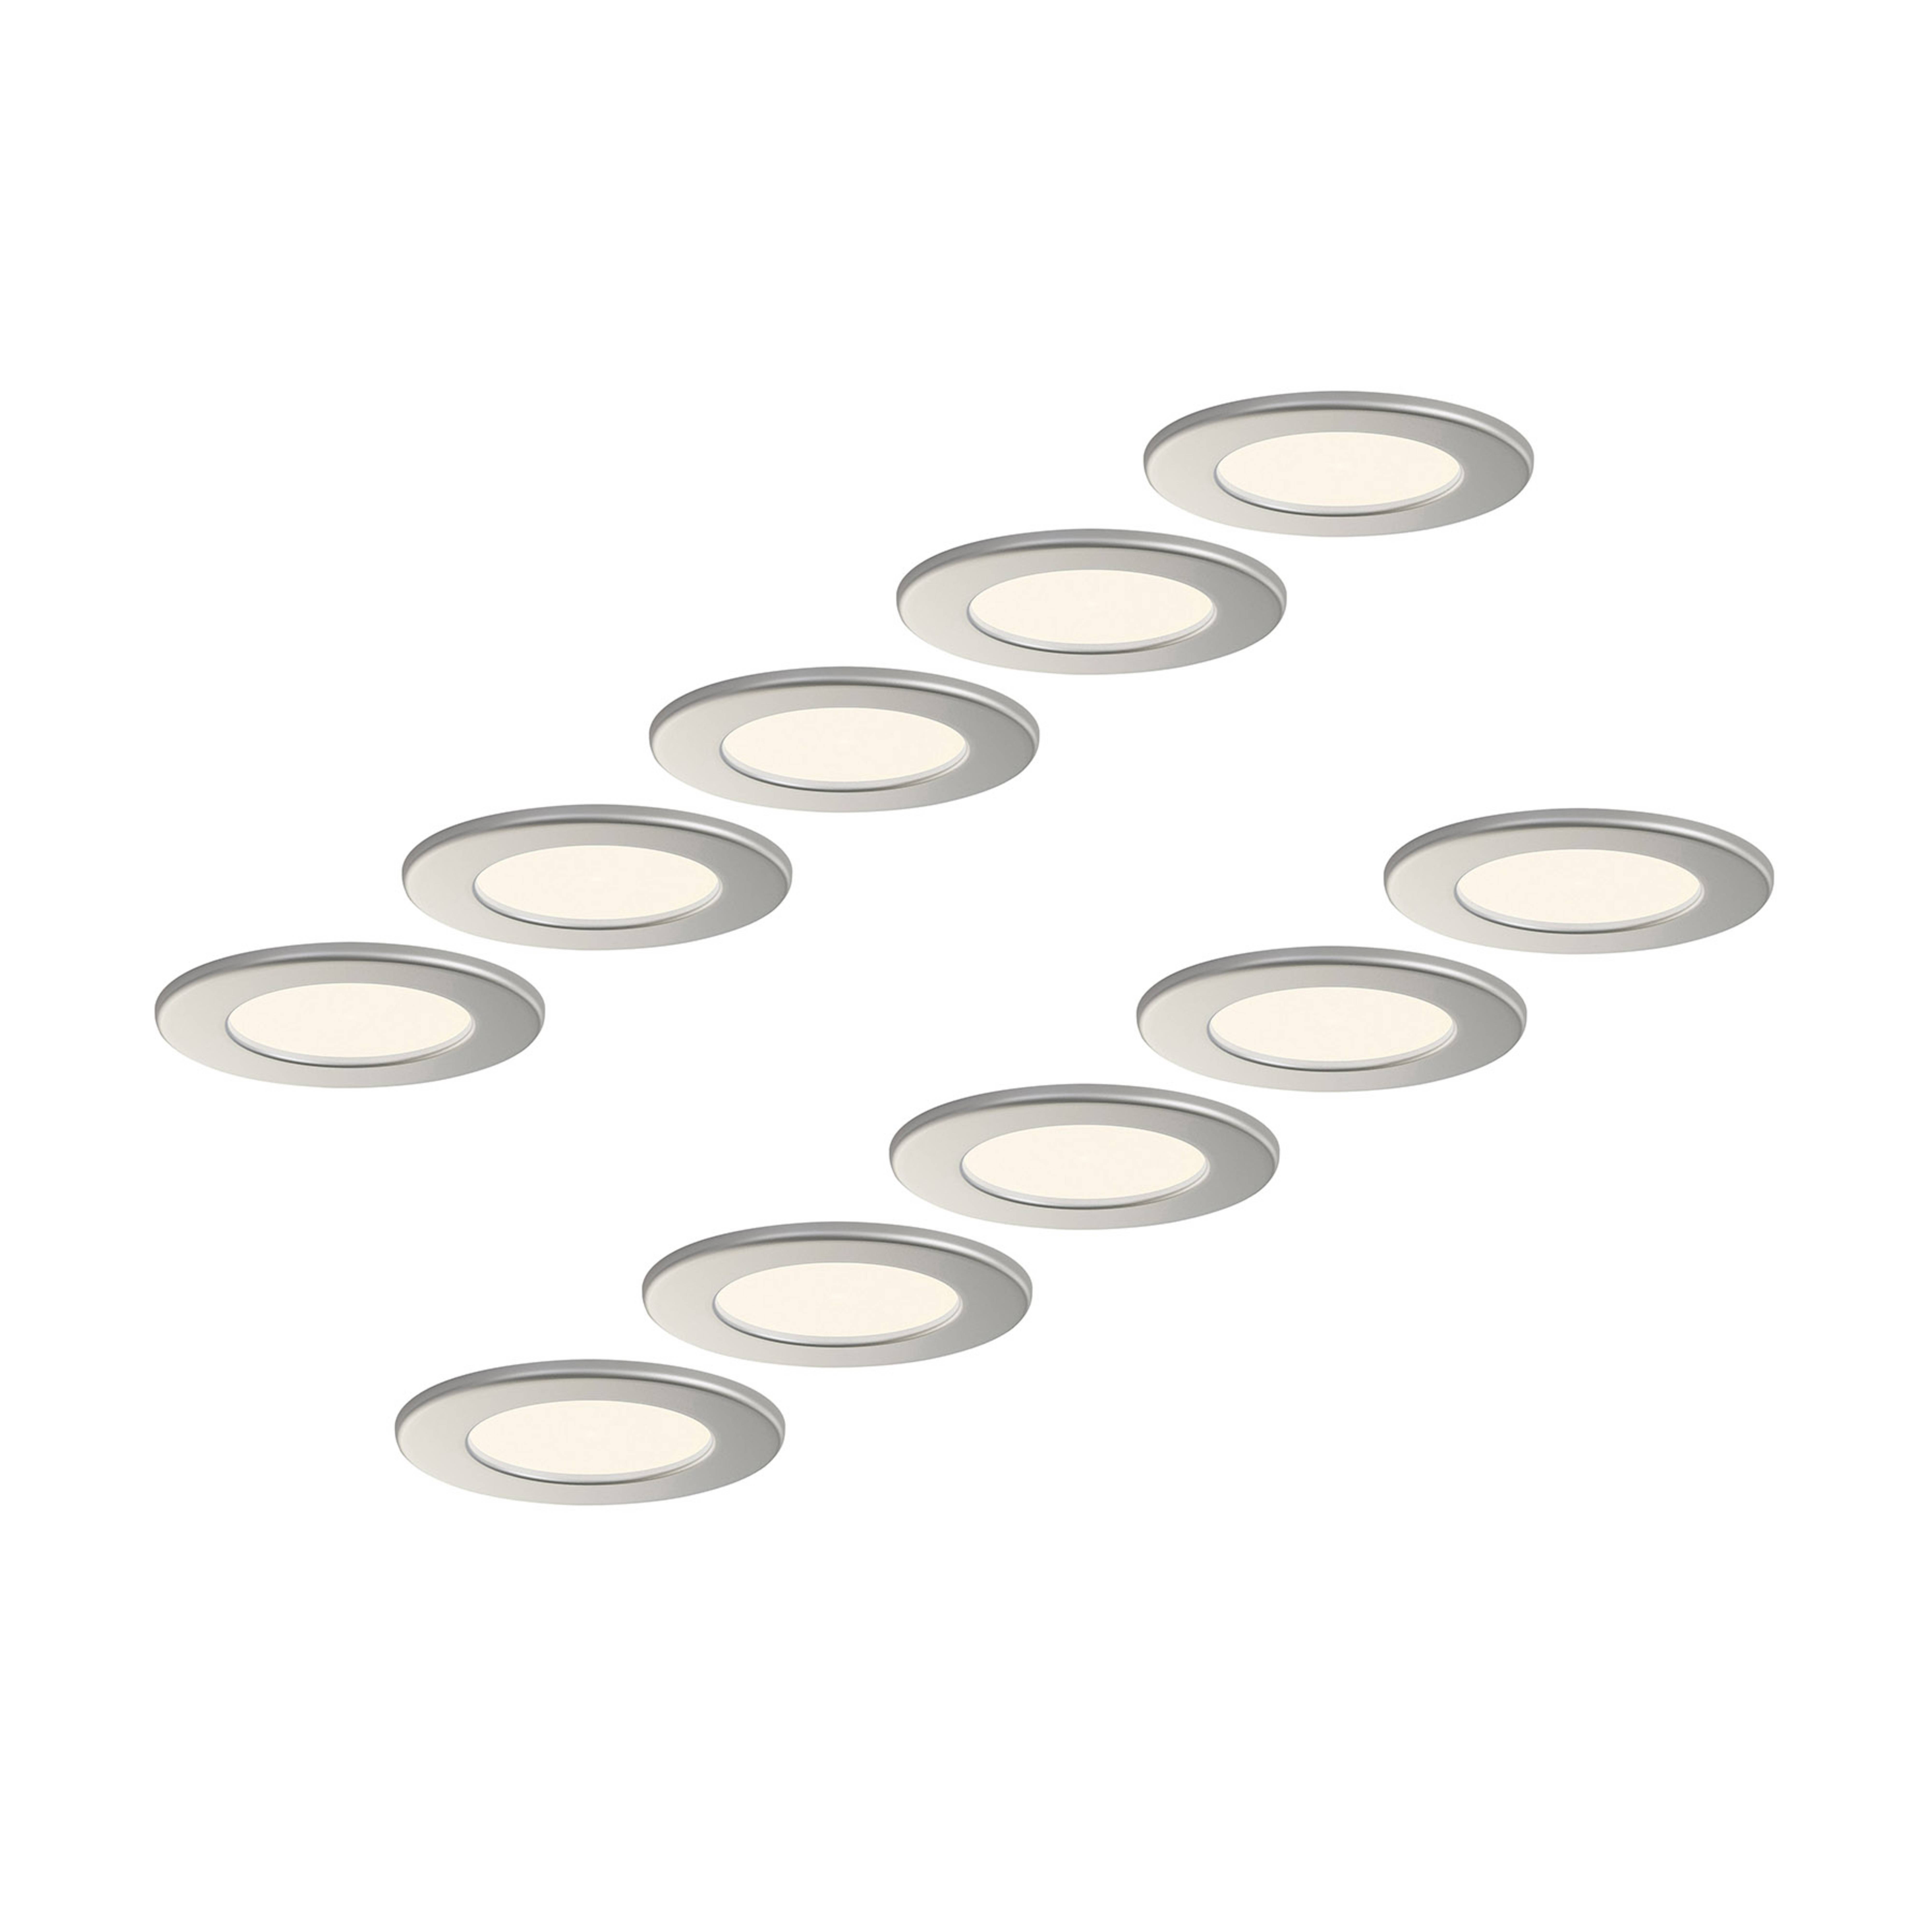 Prios LED recessed light Cadance, silver, 11.5cm, 10pcs, dimmable